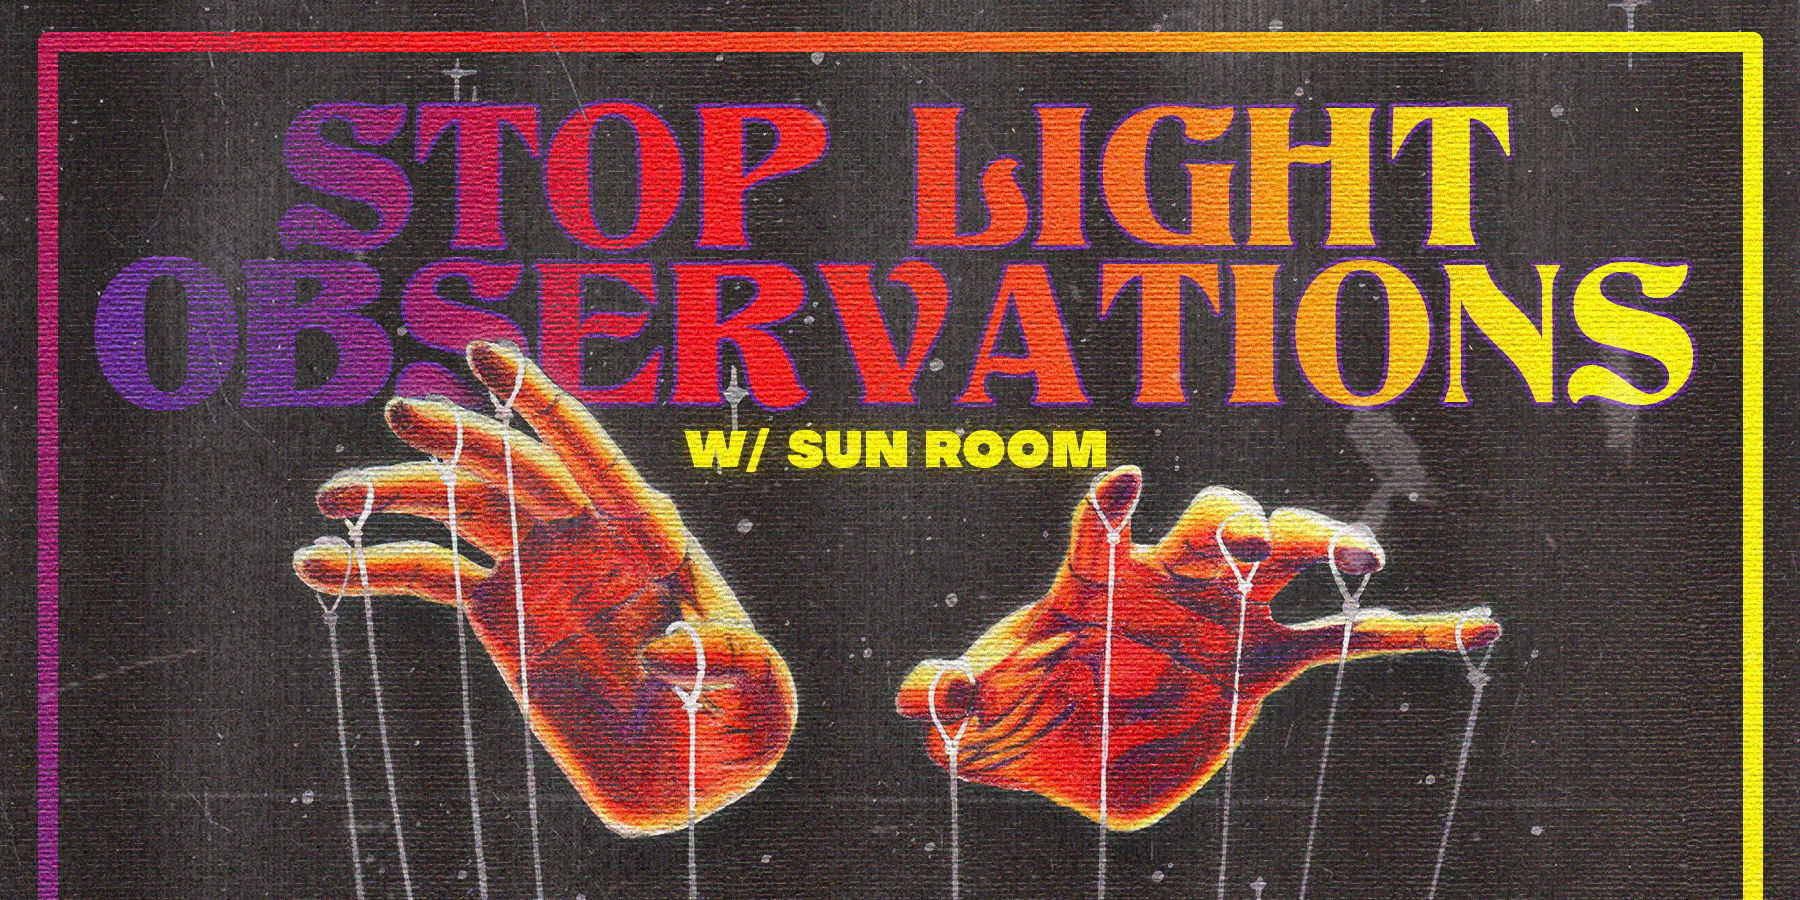 Stop Light Observations w/ Sun Room at The Parish 10/6 promotional image